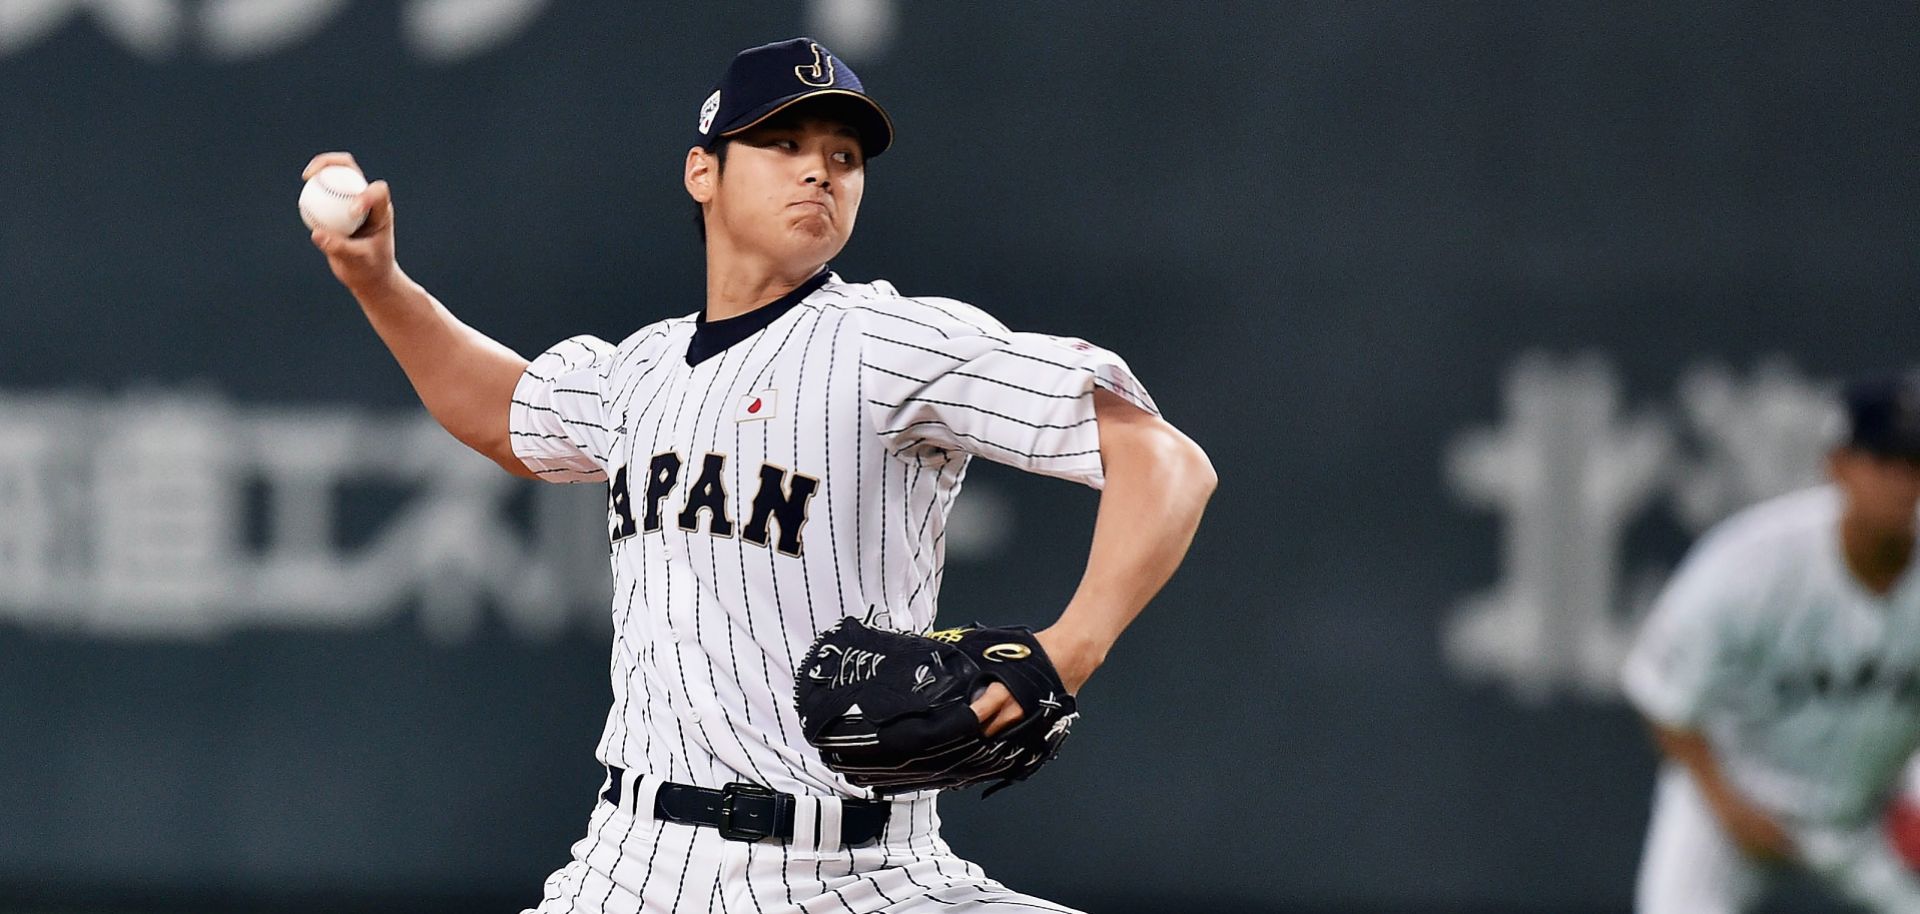 Japanese baseball player Shohei Otani has shown prowess both as a pitcher and as a power hitter, drawing interest by Major League Baseball teams.